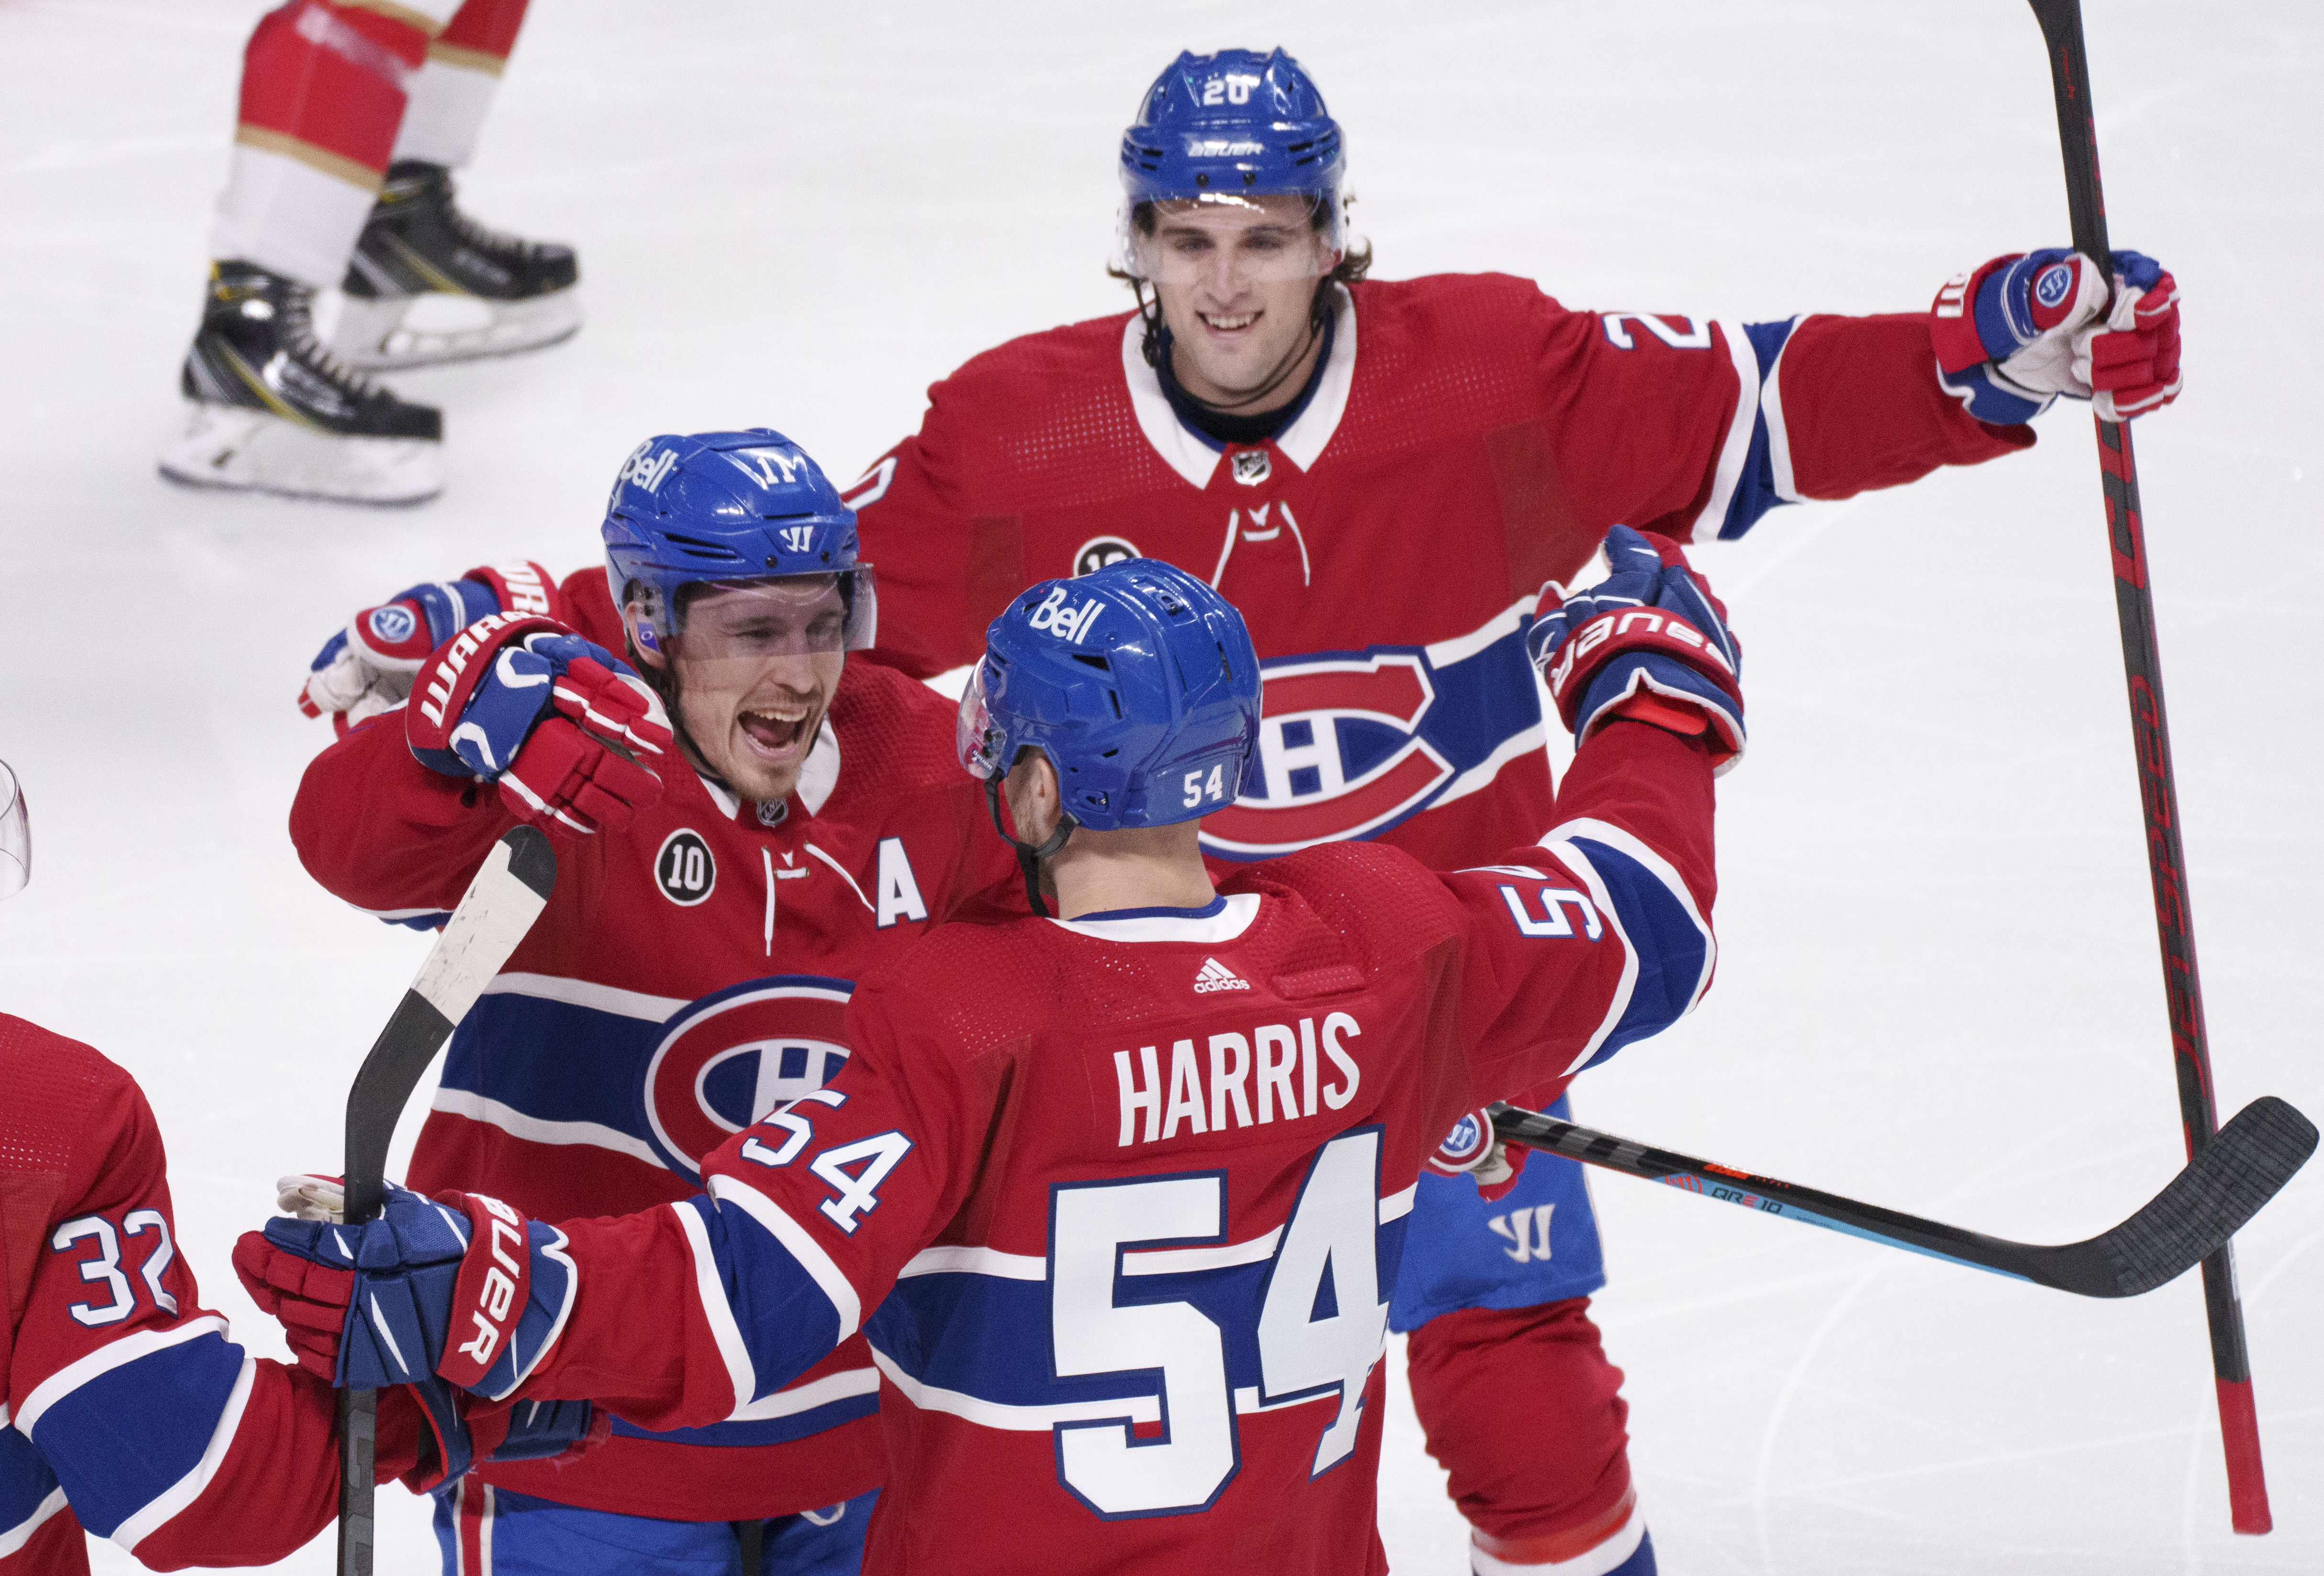 Call of the Wilde: Montreal Canadiens open season with thrilling 4-3 win over Maple Leafs